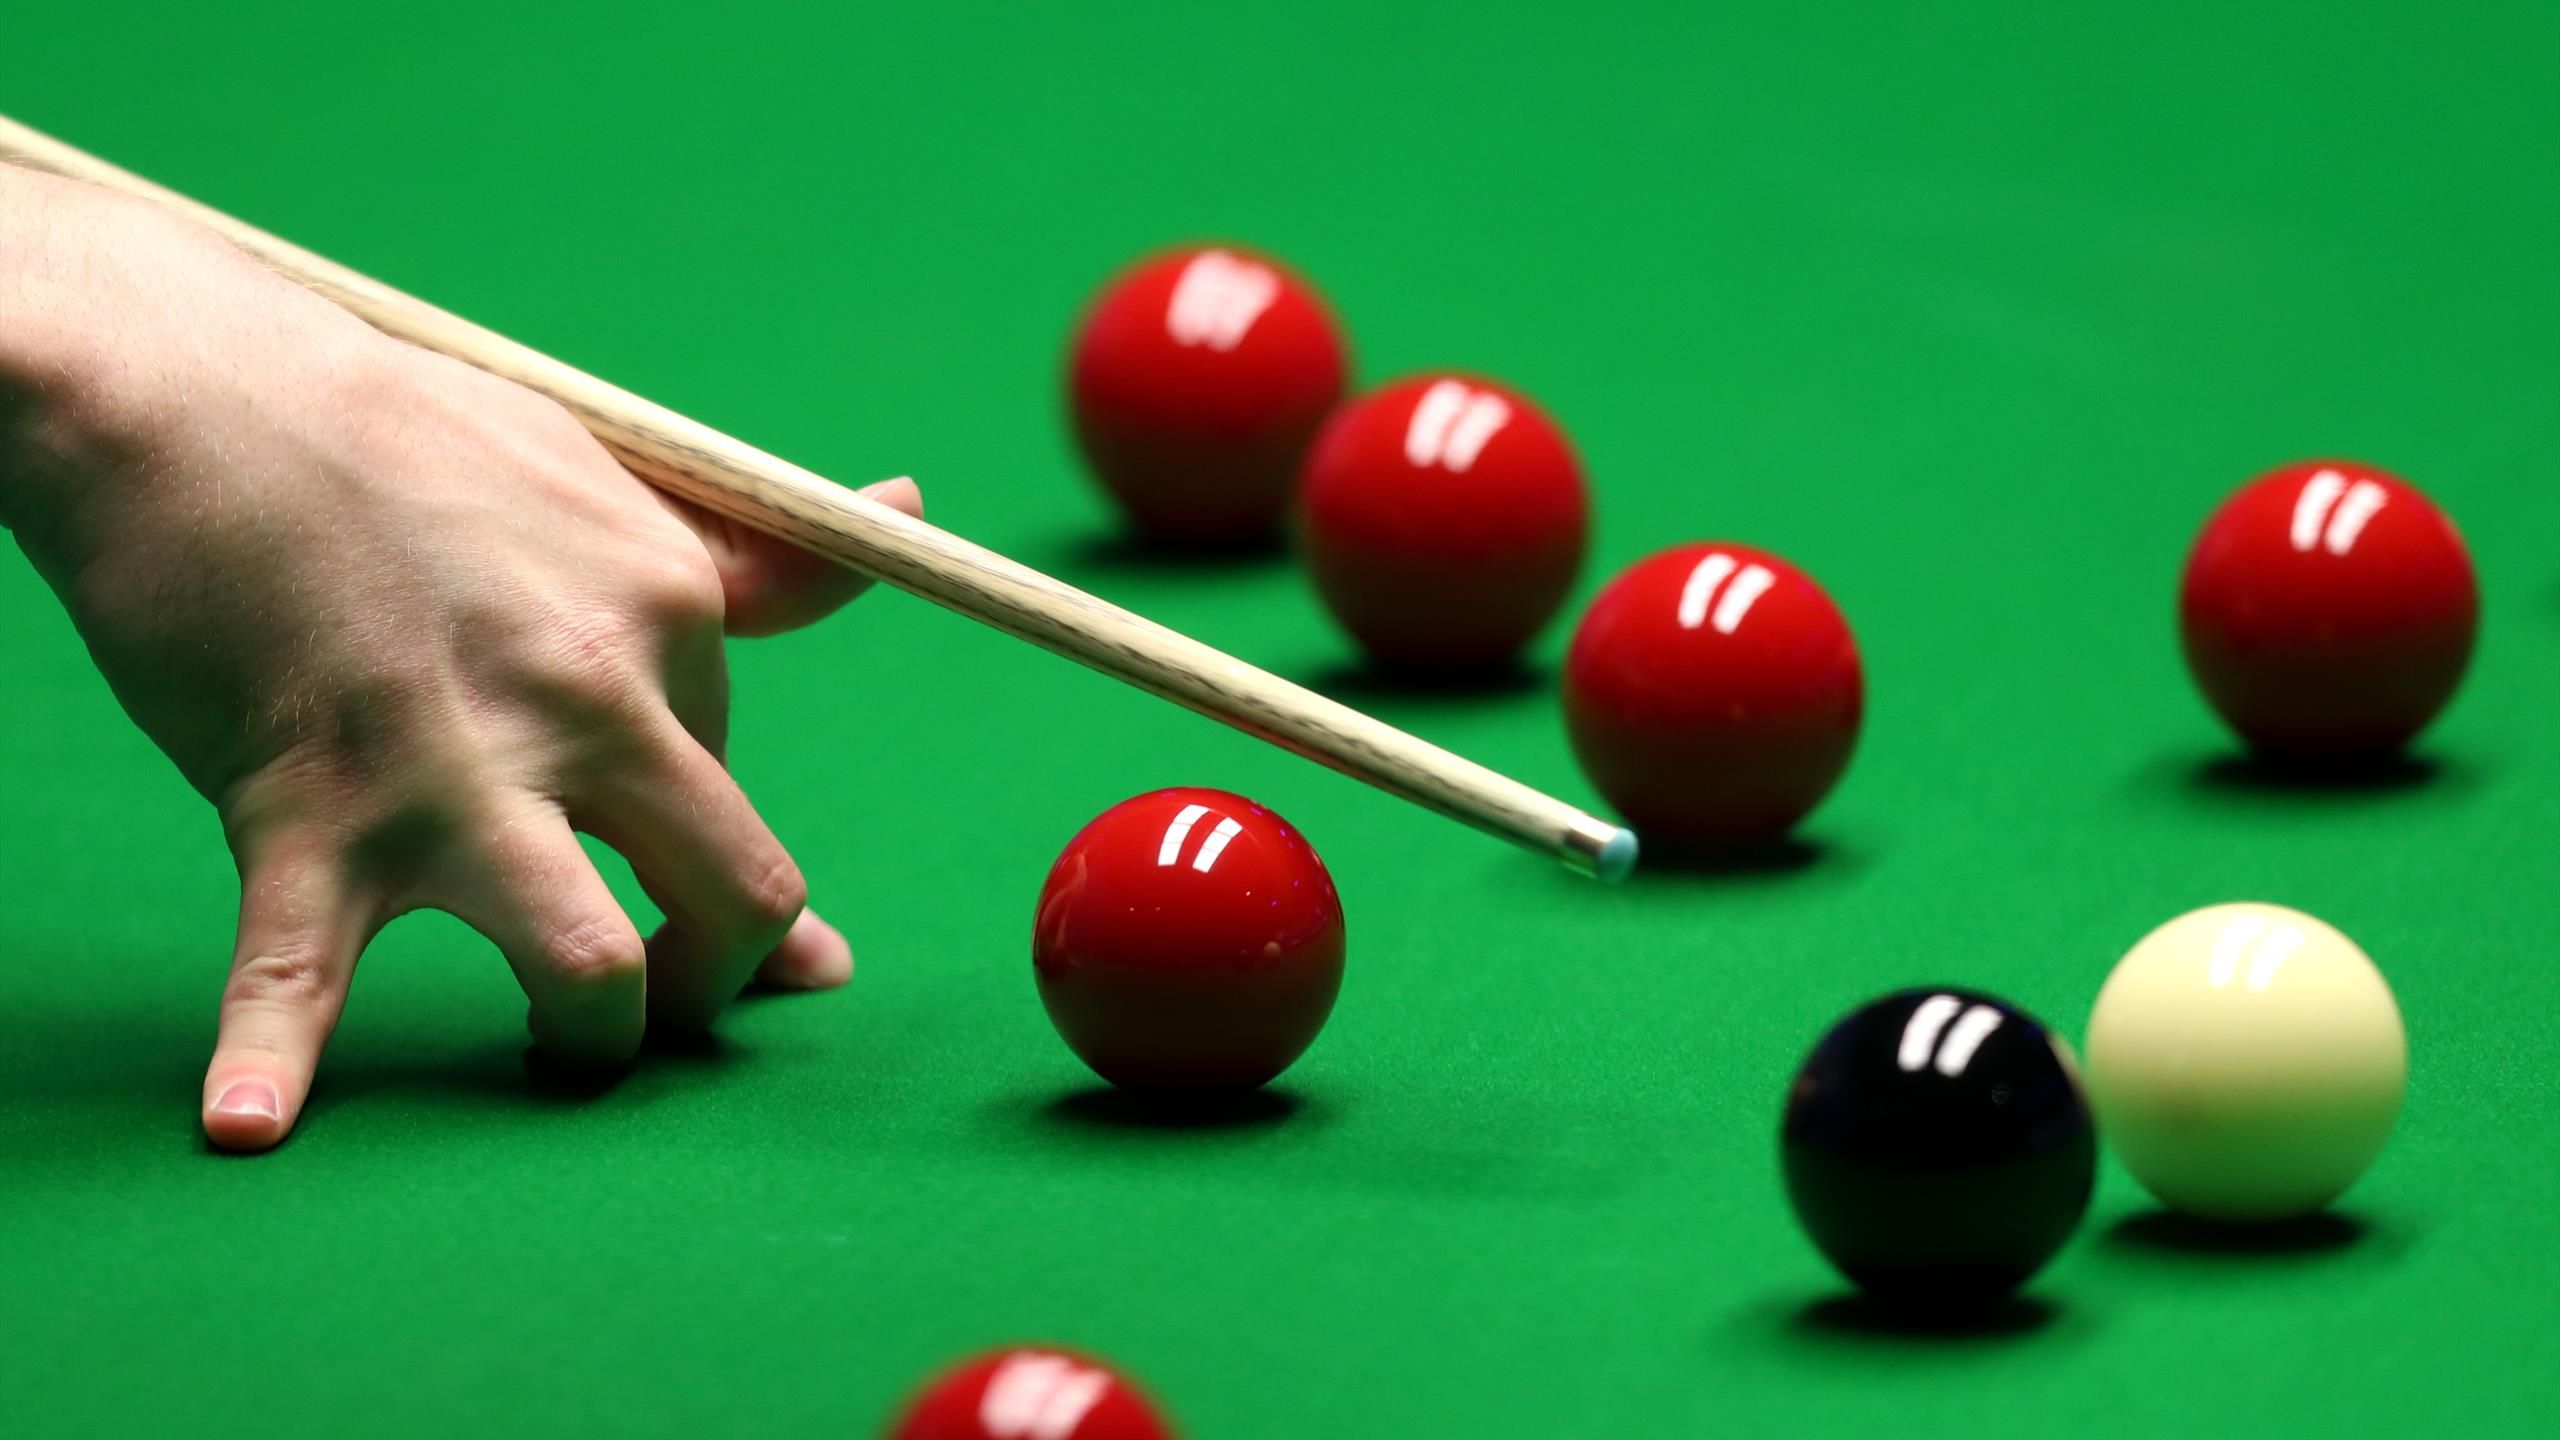 Simon Blackwell handed 18-month suspension from snooker after being found guilty of attempting to fix match outcome